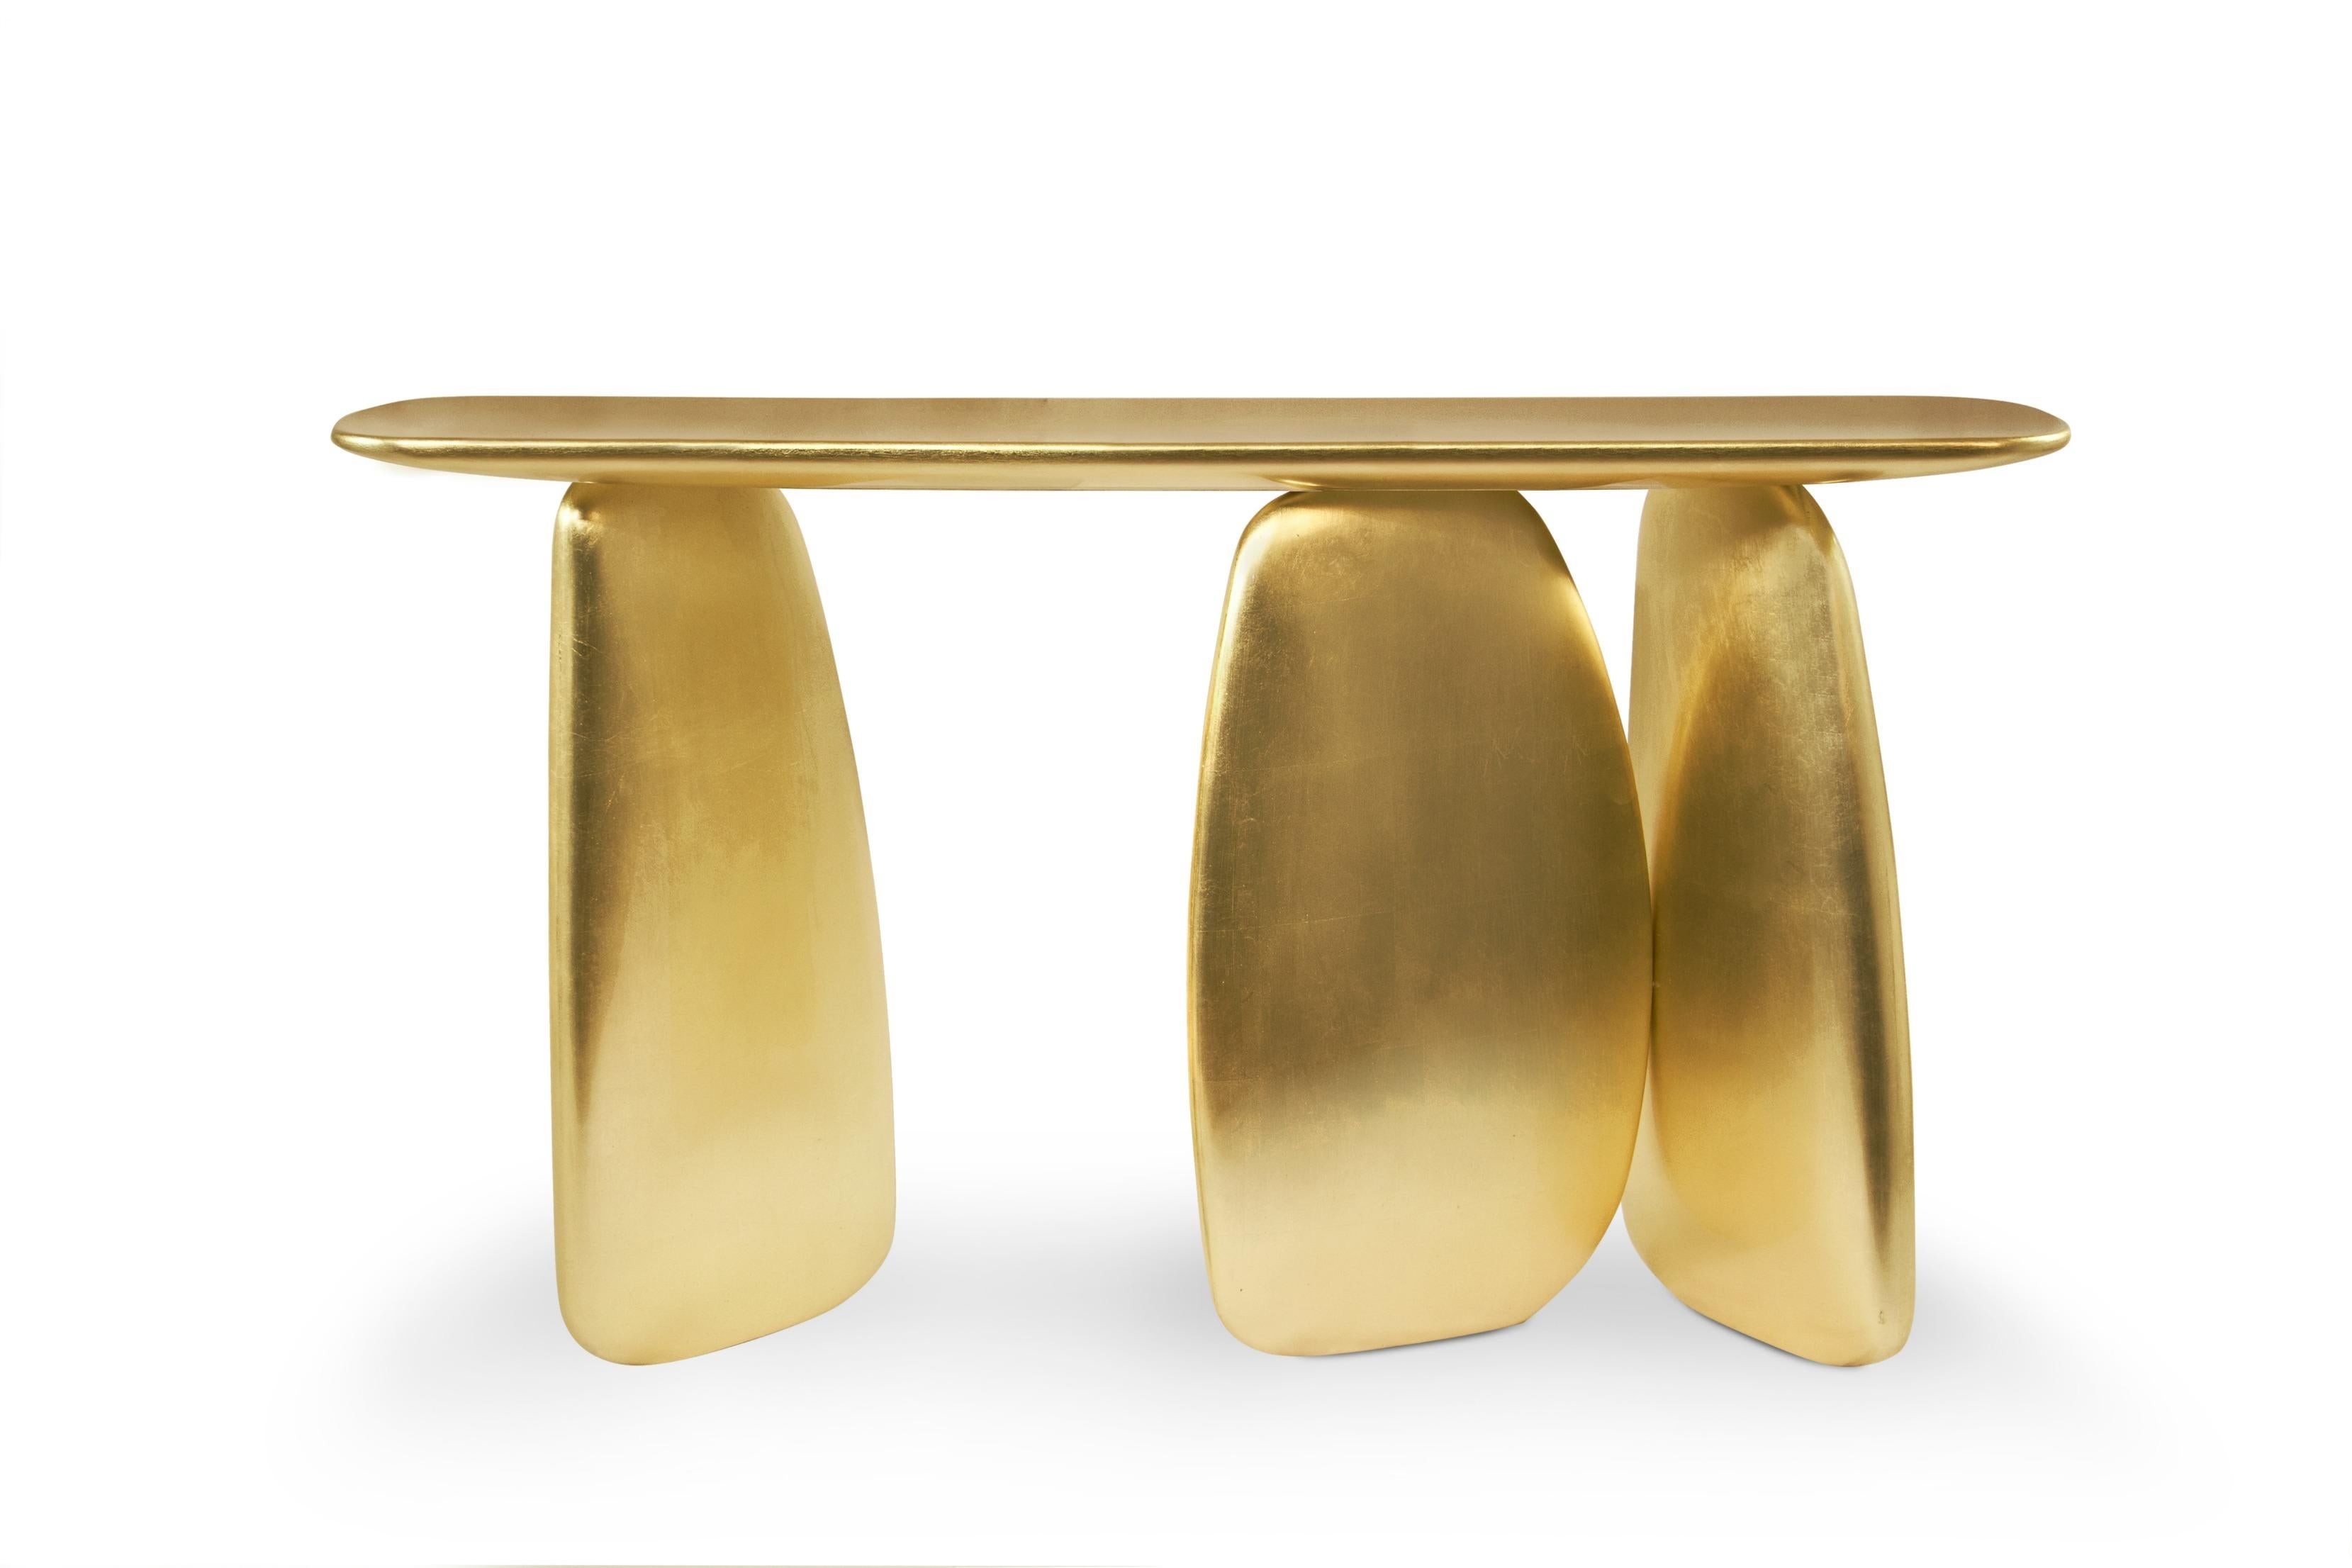 Dolmens are ancient stone monuments from the Neolithic period. These unique structures were the inspiration behind the ARDARA Console Table. With a finish in gold leaf with a gloss varnish, this console table will give a unique twist to any interior